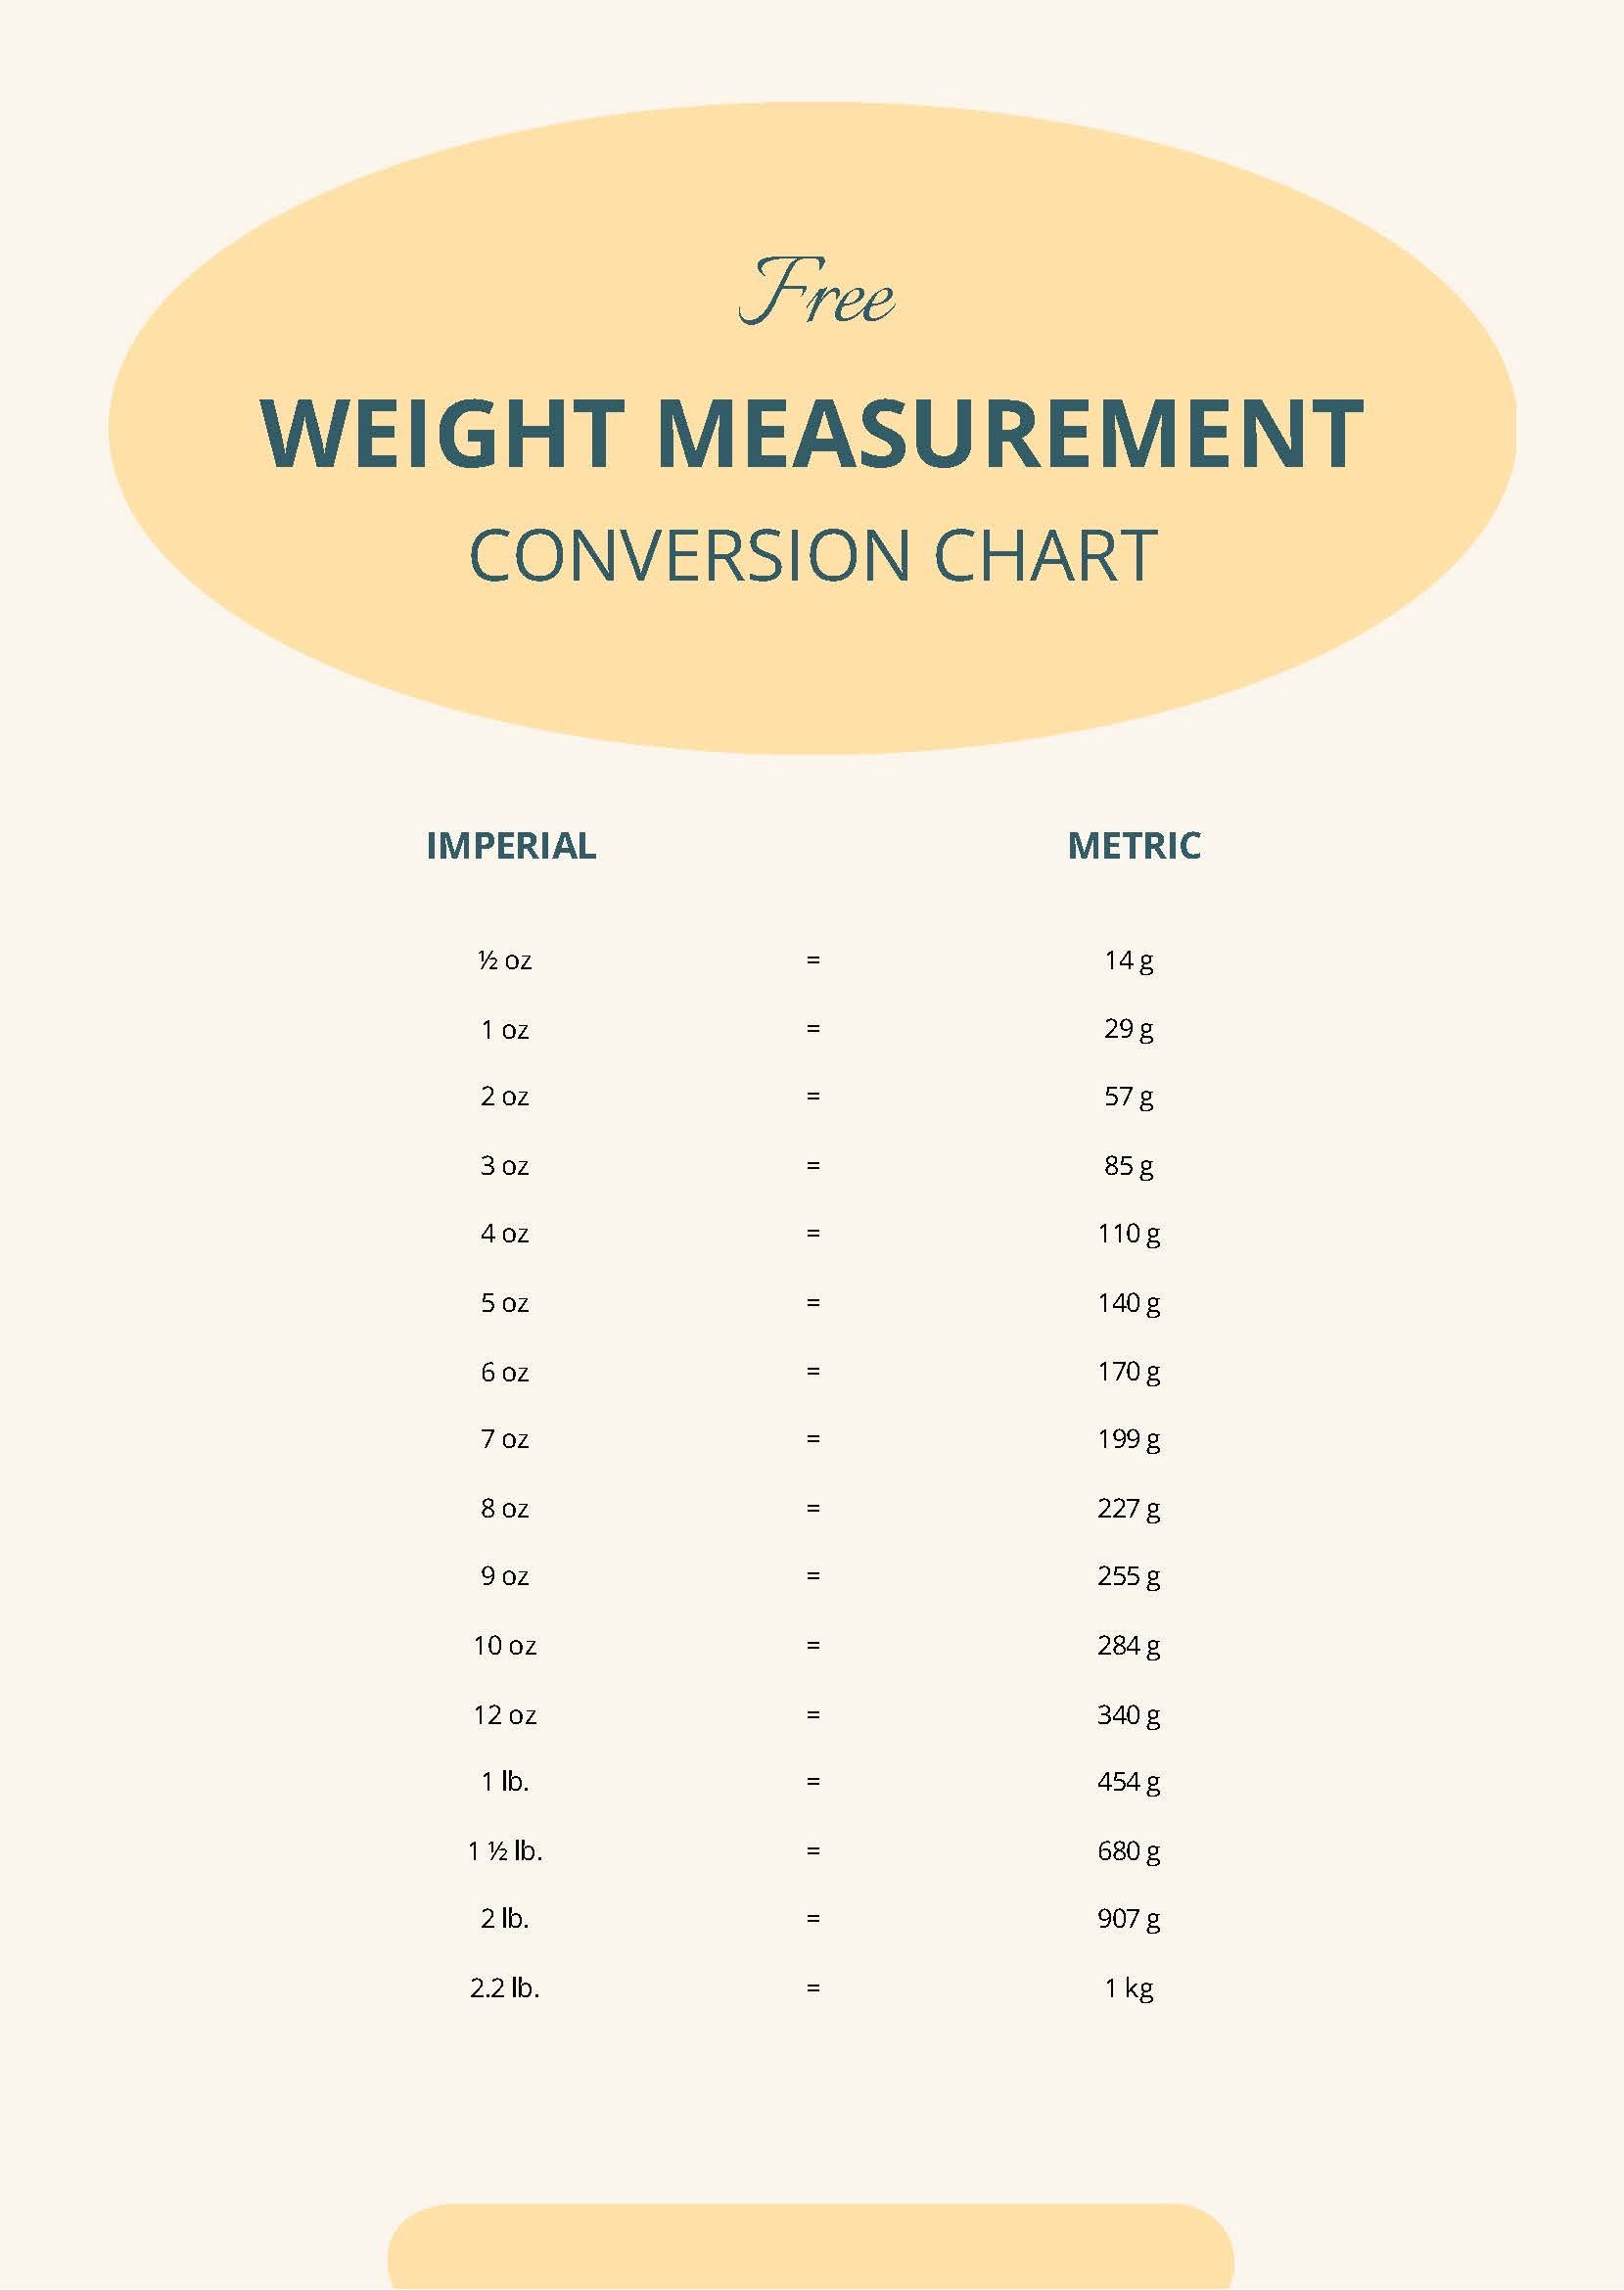 Weight Measurement Conversion Chart